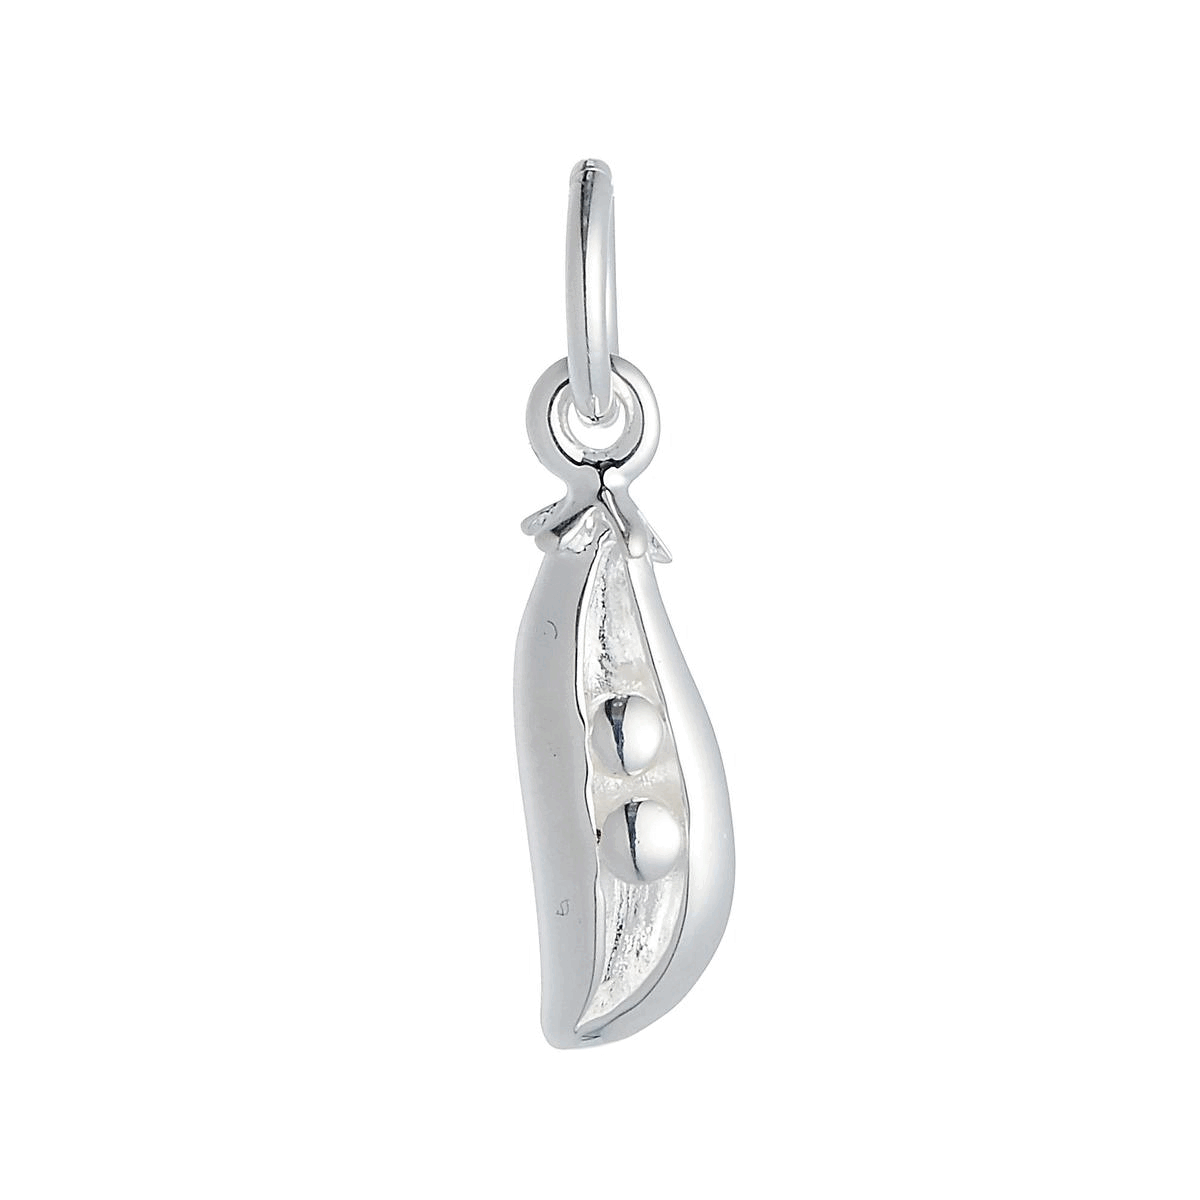 silver two peas in a pod charm twins sisters best friends for necklace or bracelet